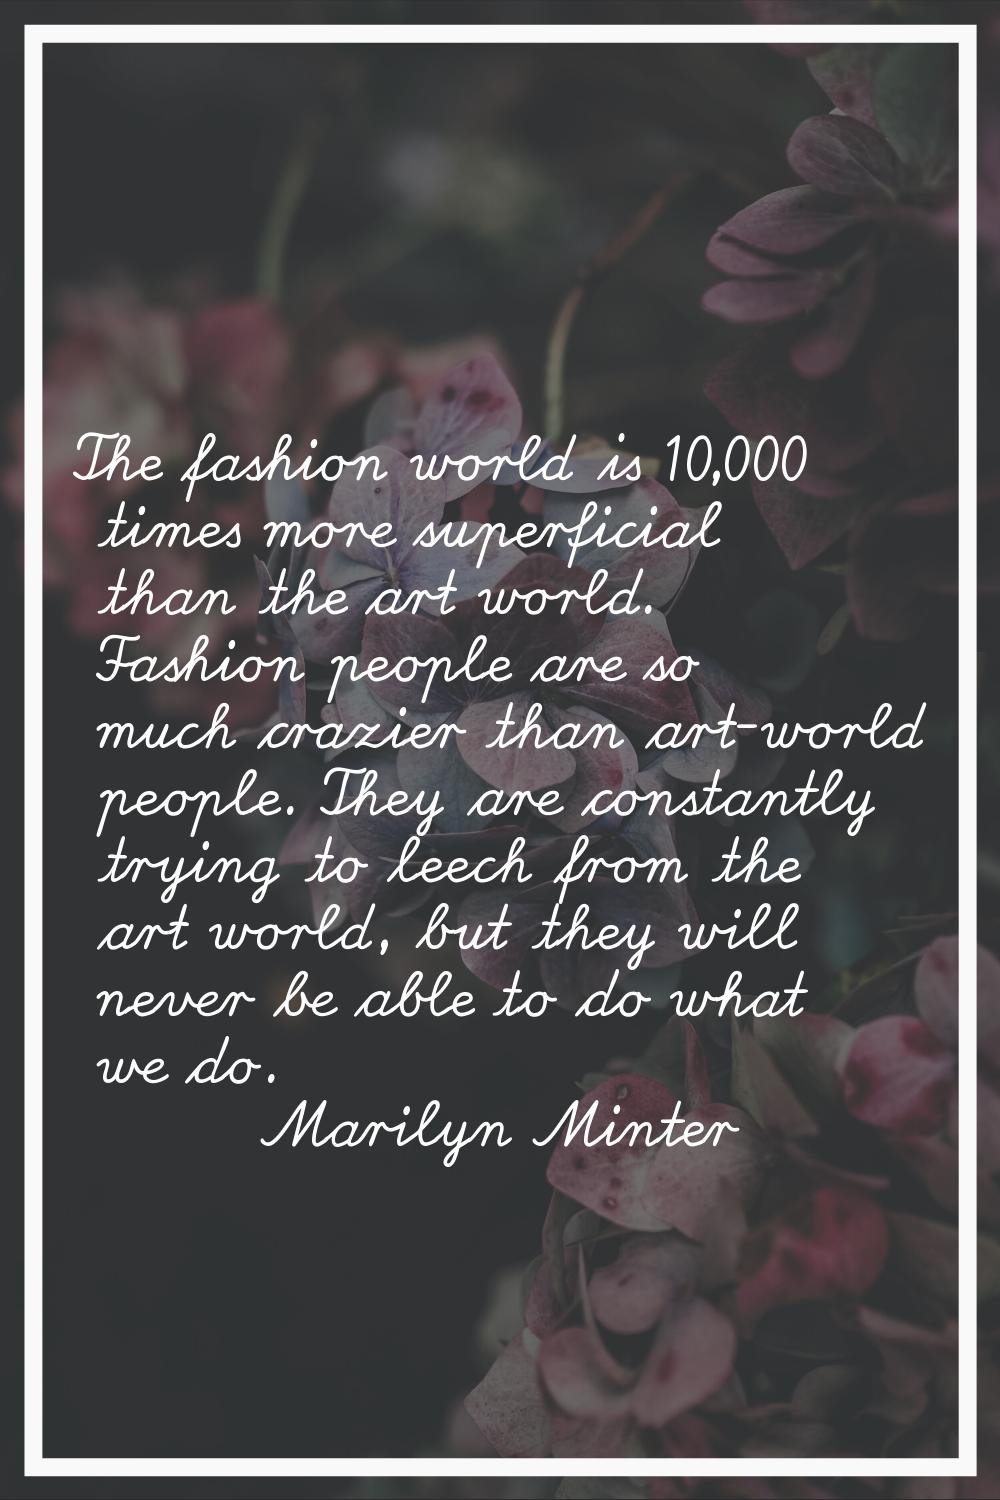 The fashion world is 10,000 times more superficial than the art world. Fashion people are so much c